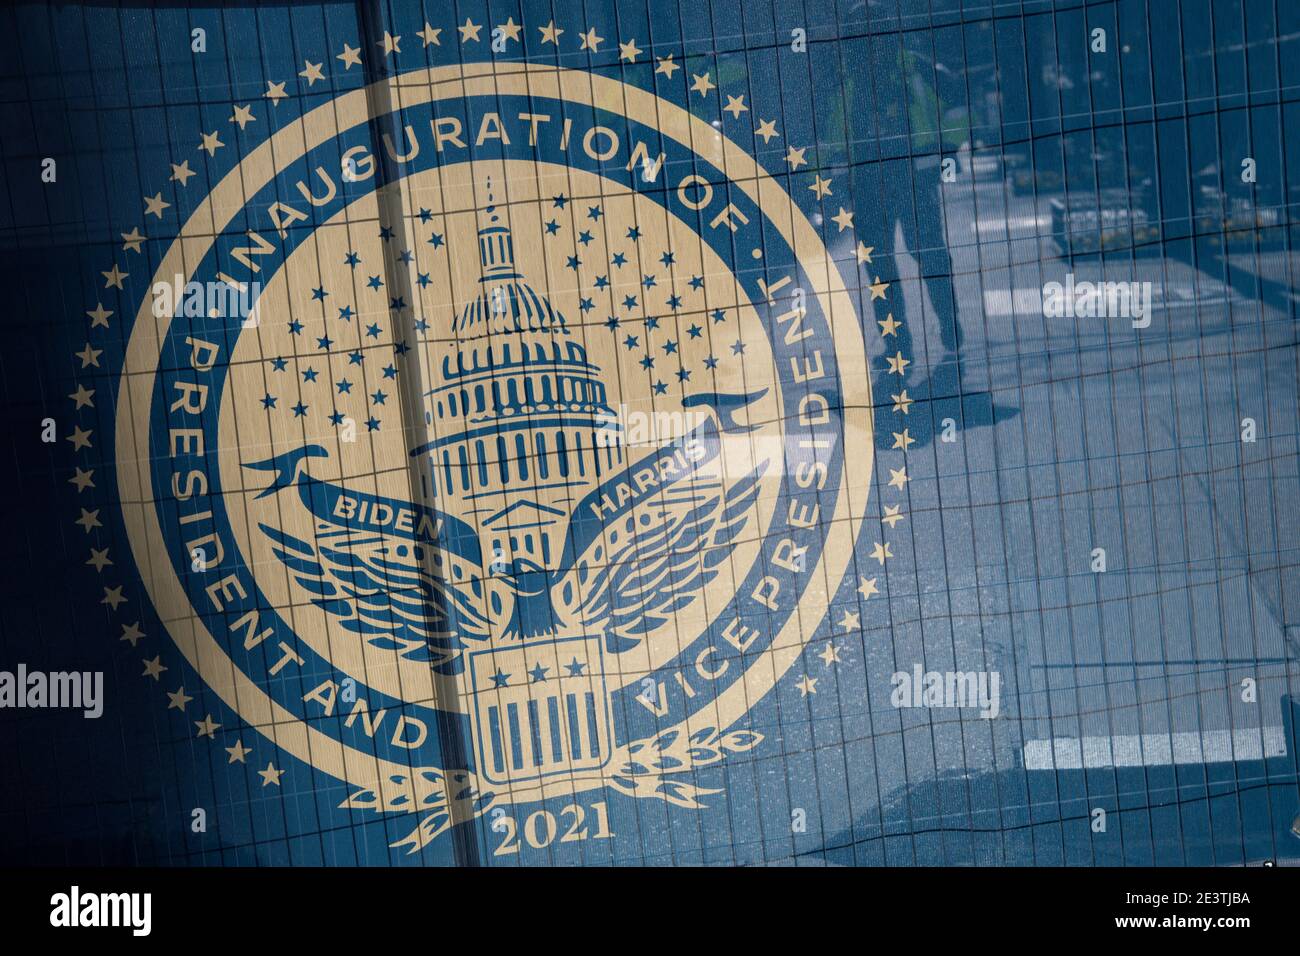 Washington, USA. 20th Jan, 2021. The Presidential Inauguration Seal near the White House in Washington, DC, on Inauguration Day, January 20, 2021. Today, President Elect Joe Biden and Vice President Elect and Kamala Harris will be Inaugurated at the U.S. Capitol, where 2 weeks earlier an insurrectionist mob tried to disrupt the certification of the Electoral College. (Graeme Sloan/Sipa USA) Credit: Sipa USA/Alamy Live News Stock Photo